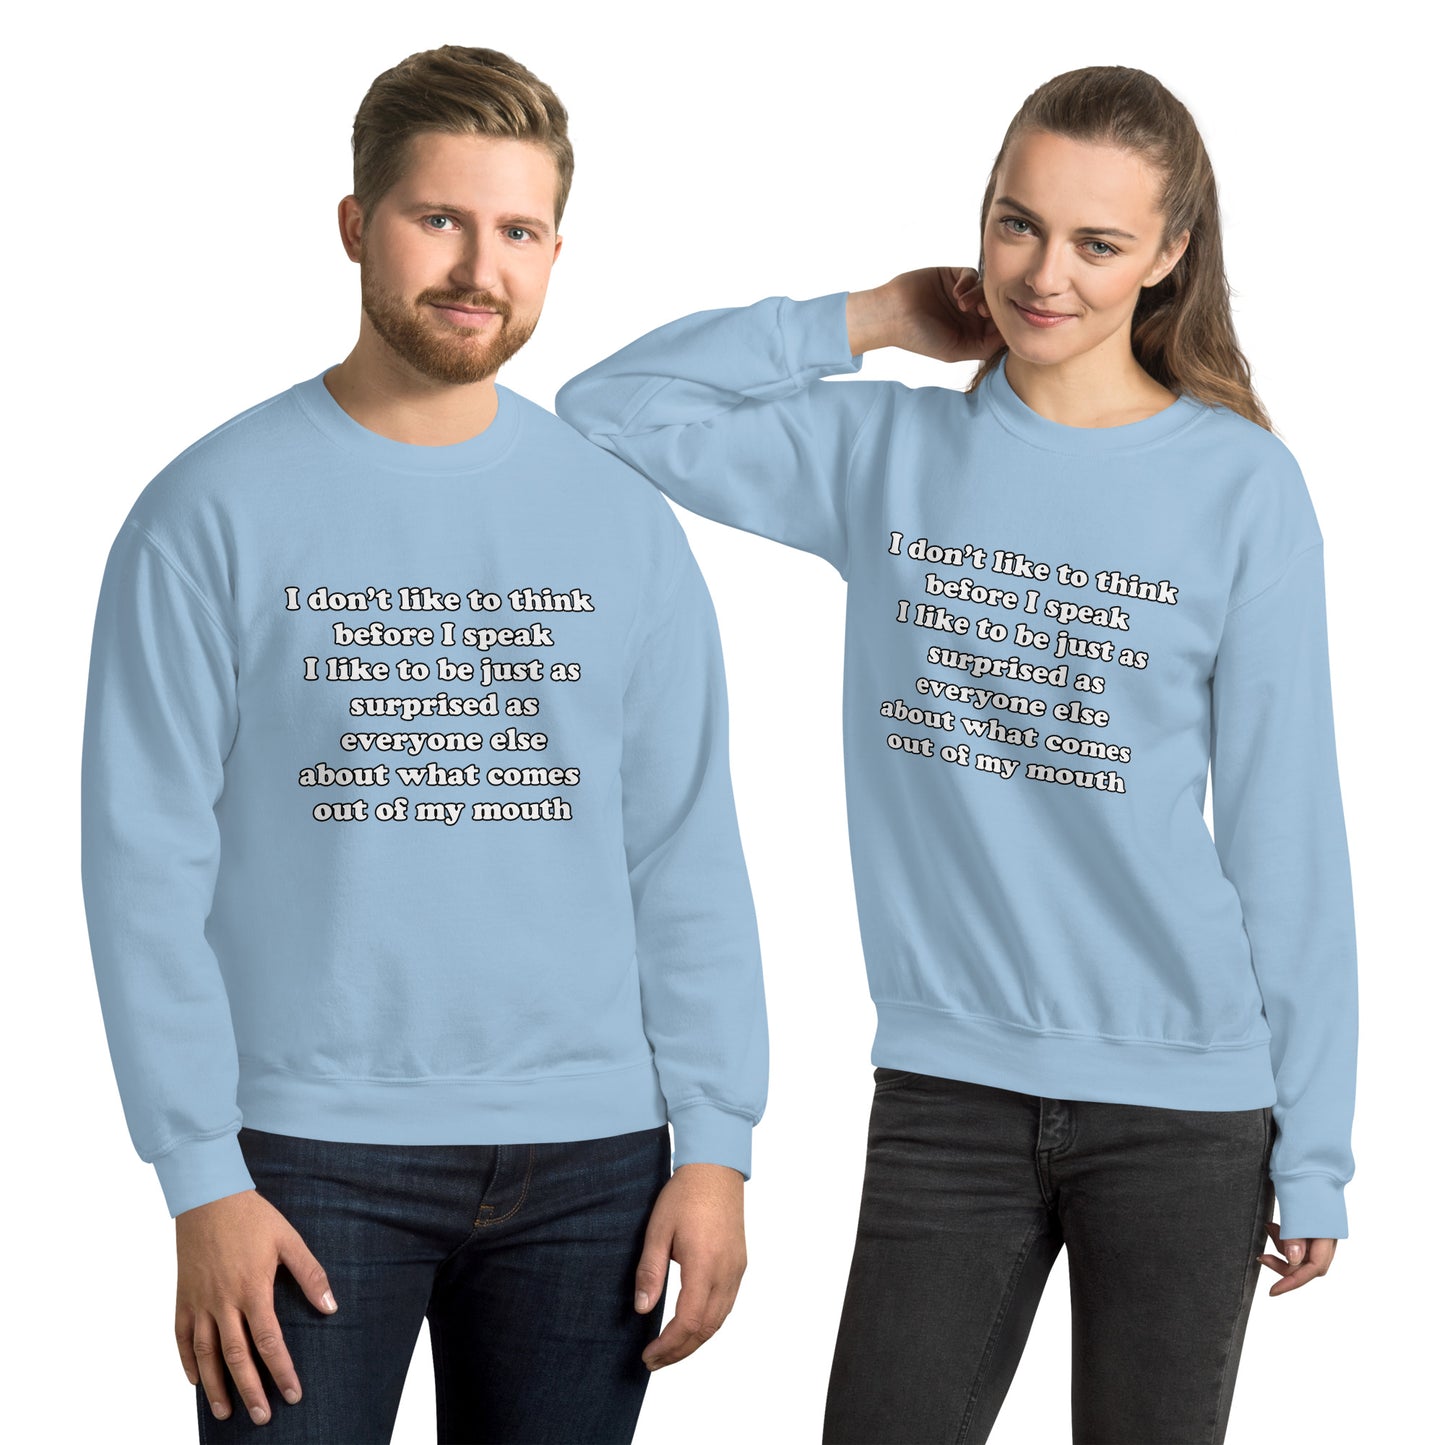 Man and woman with light blue sweatshirt with text “I don't think before I speak Just as serprised as everyone about what comes out of my mouth"